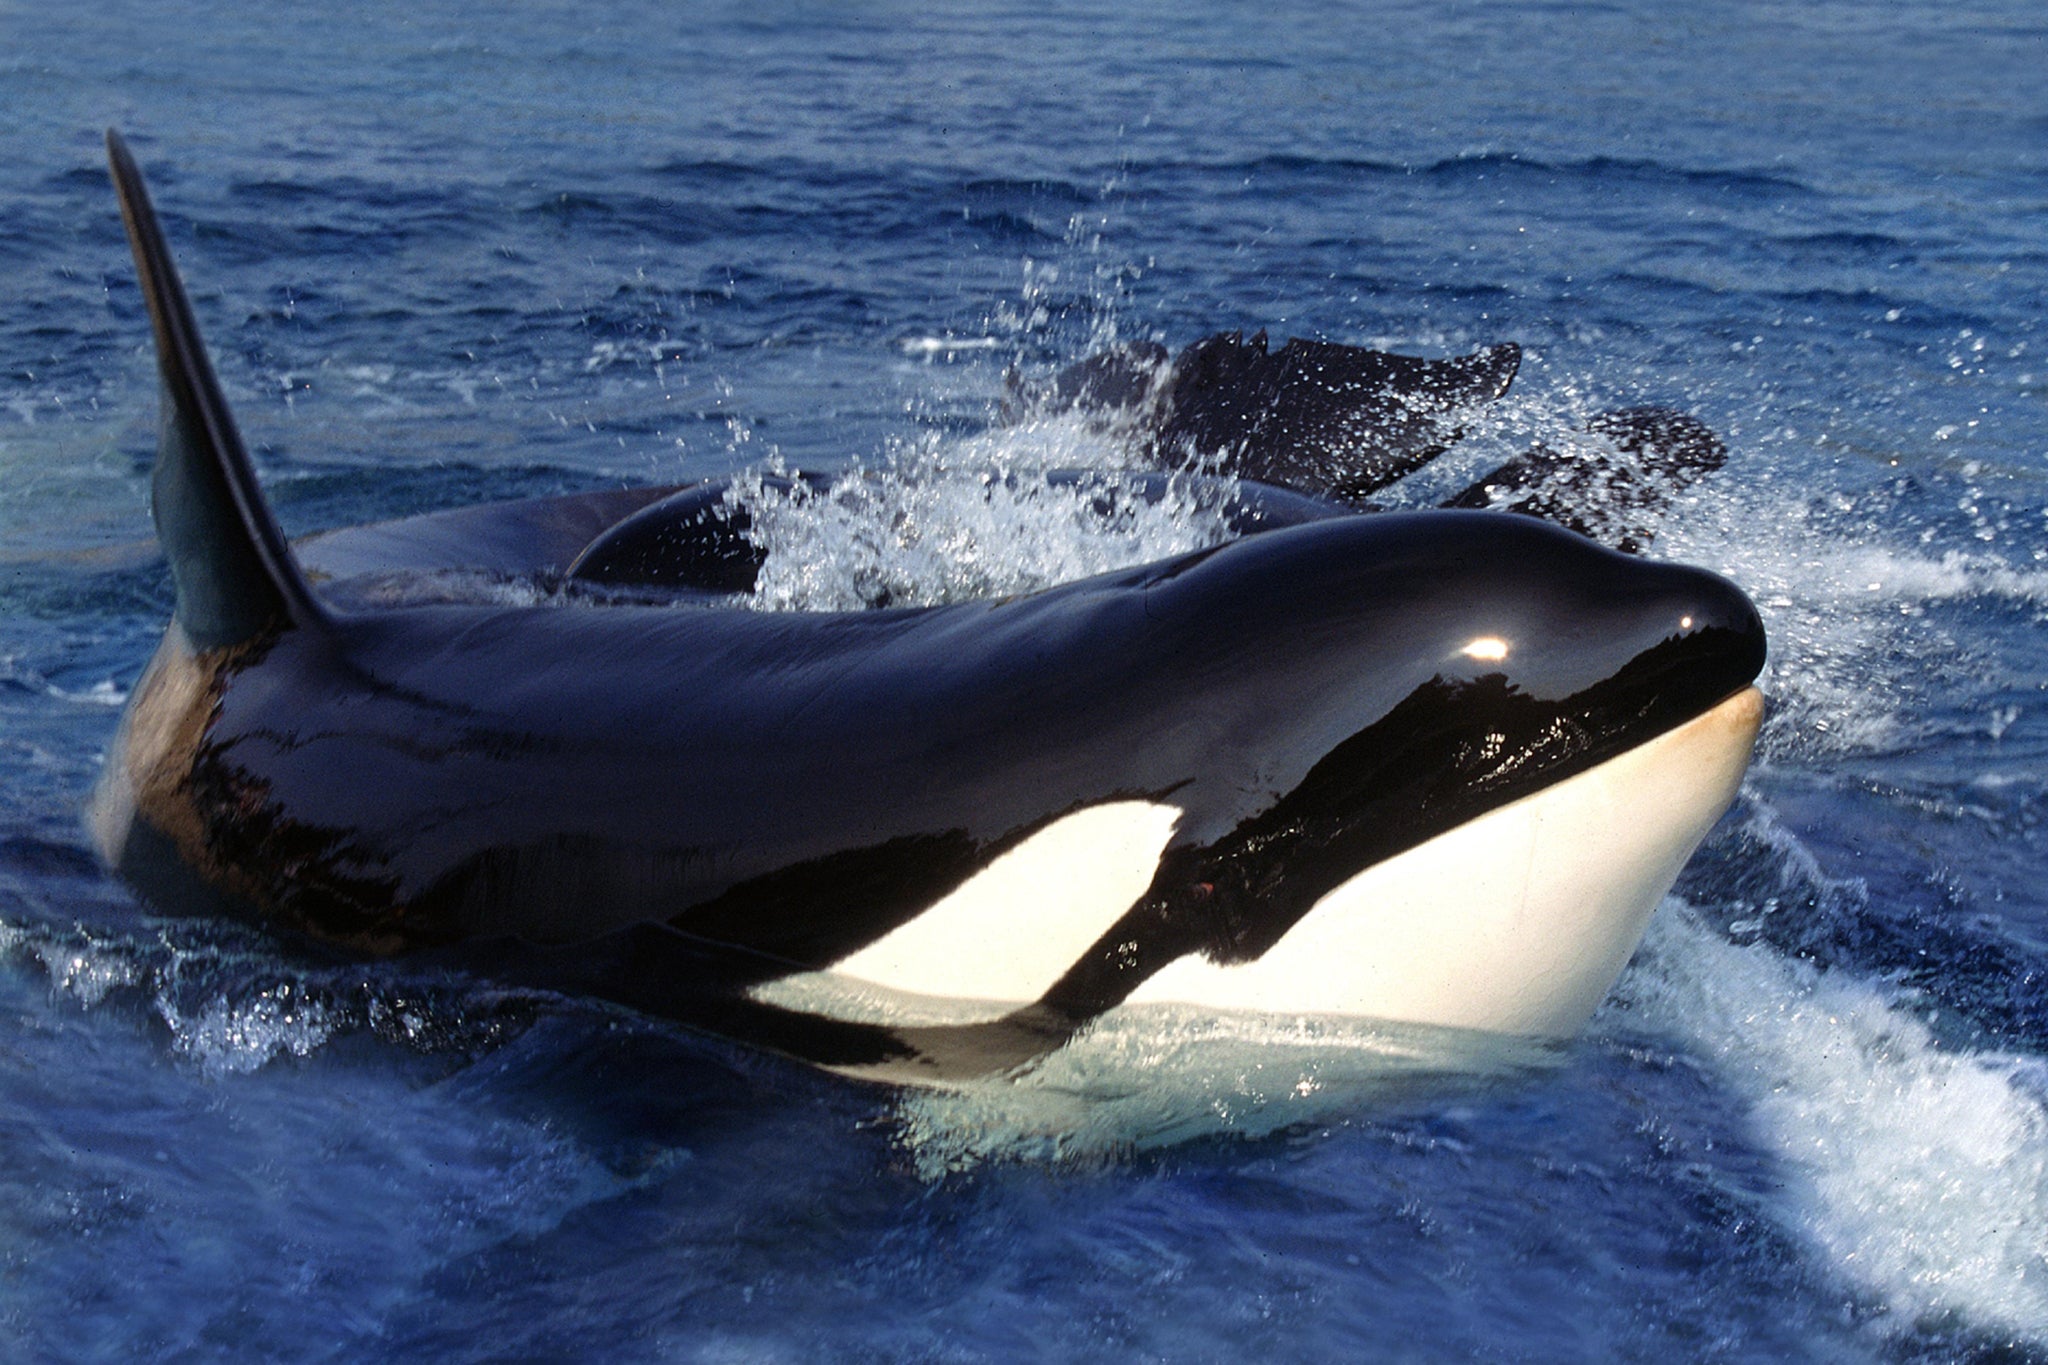 Female killer whales can live into their 80s, while males are typically dead by 40